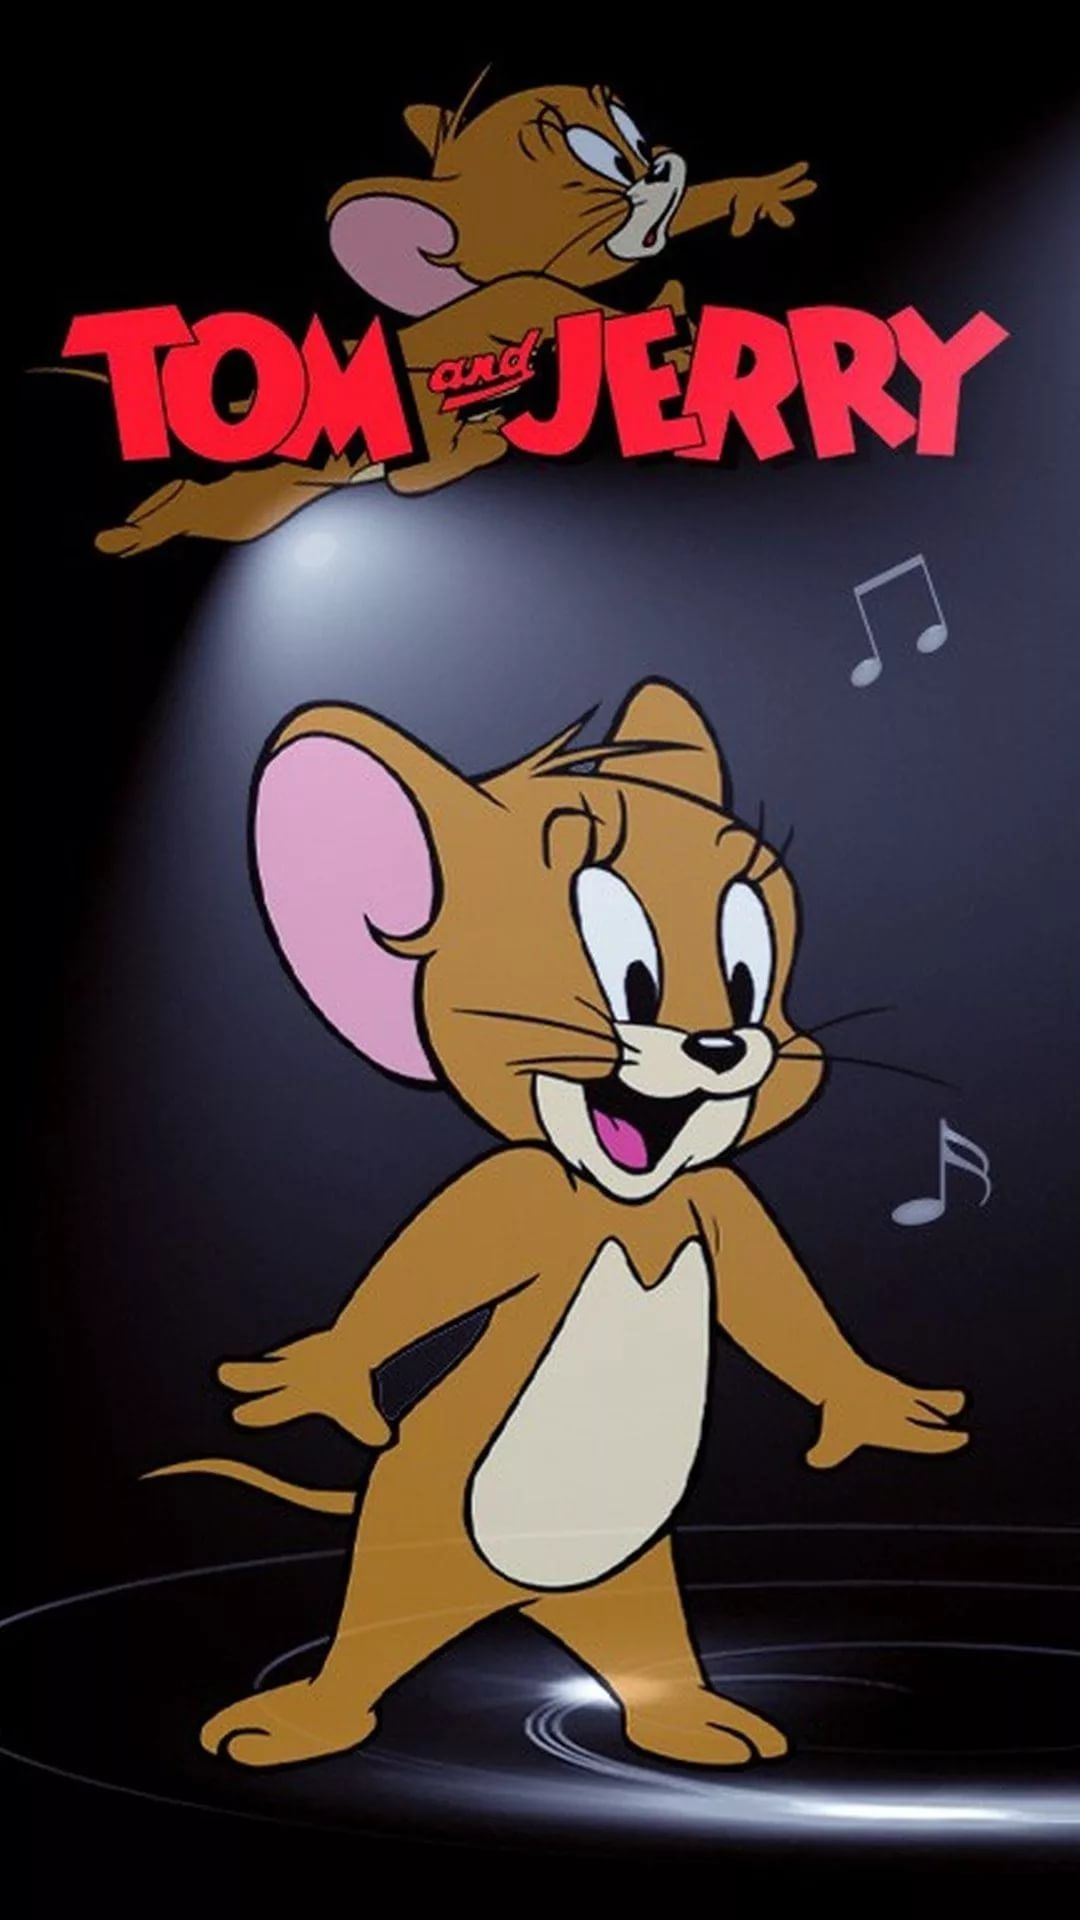 Tom And Jerry home screen wallpaper